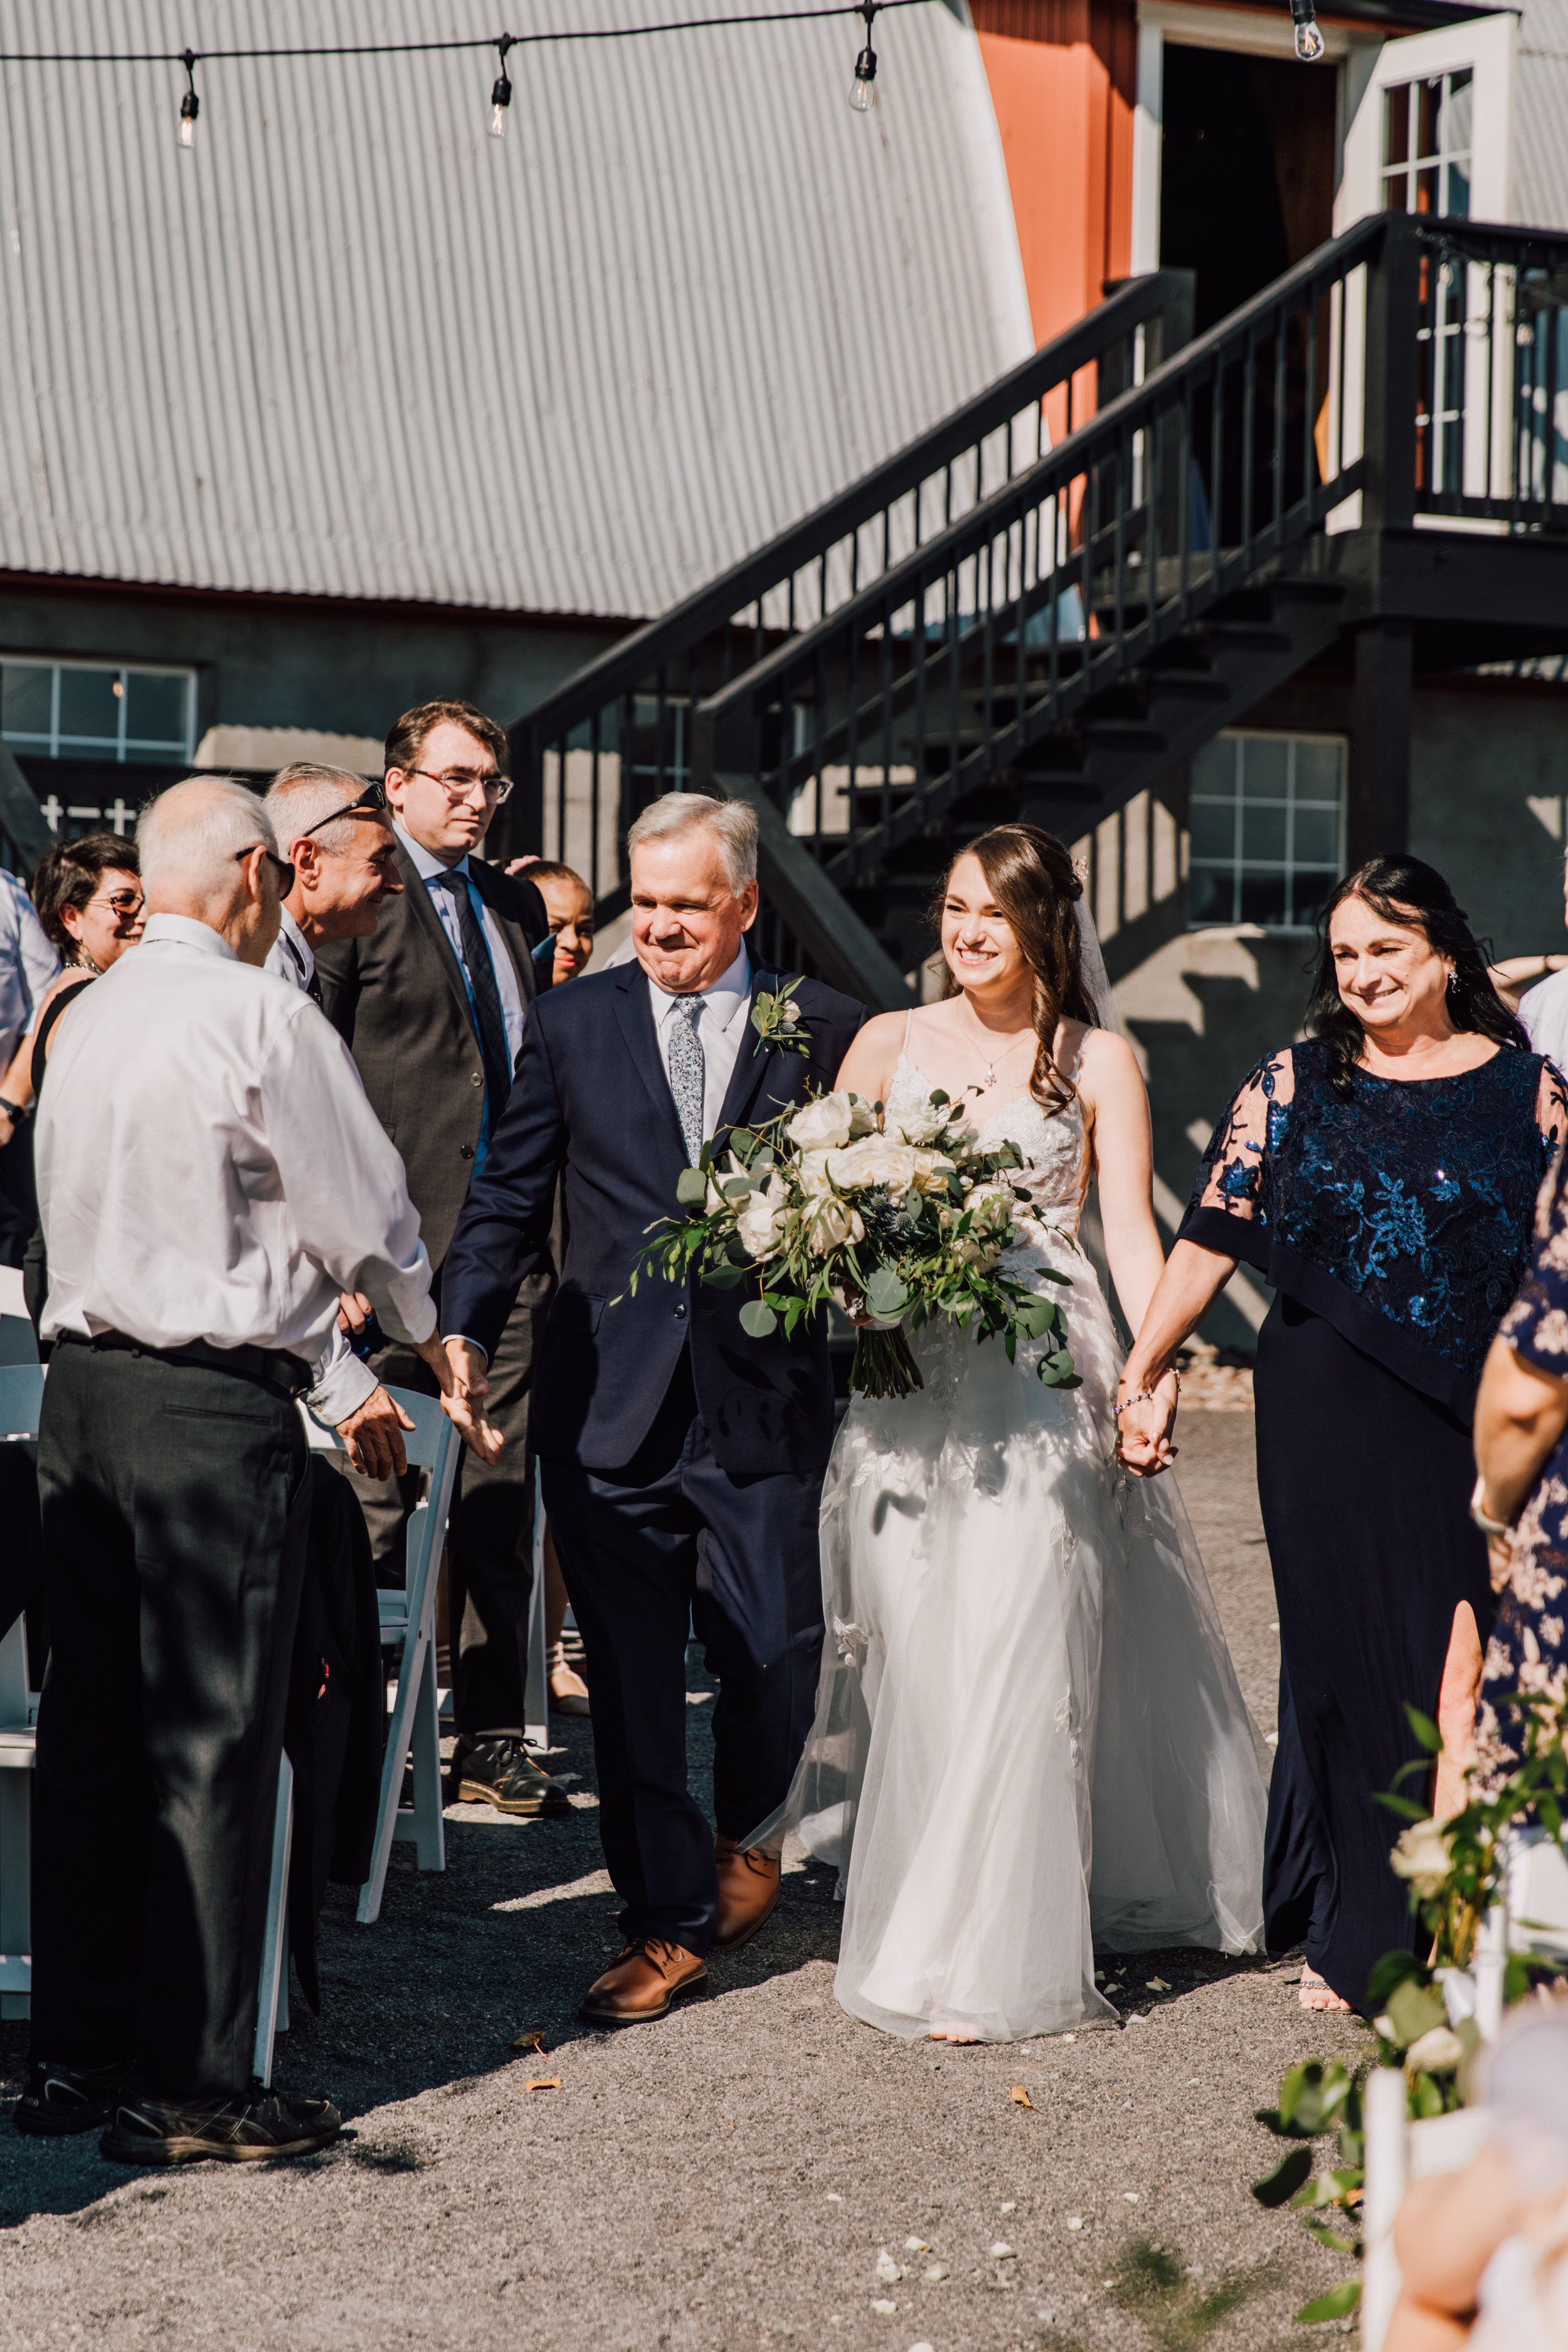  Bride walks down the aisle at outdoor wedding ceremony at Hayloft on the Arch 